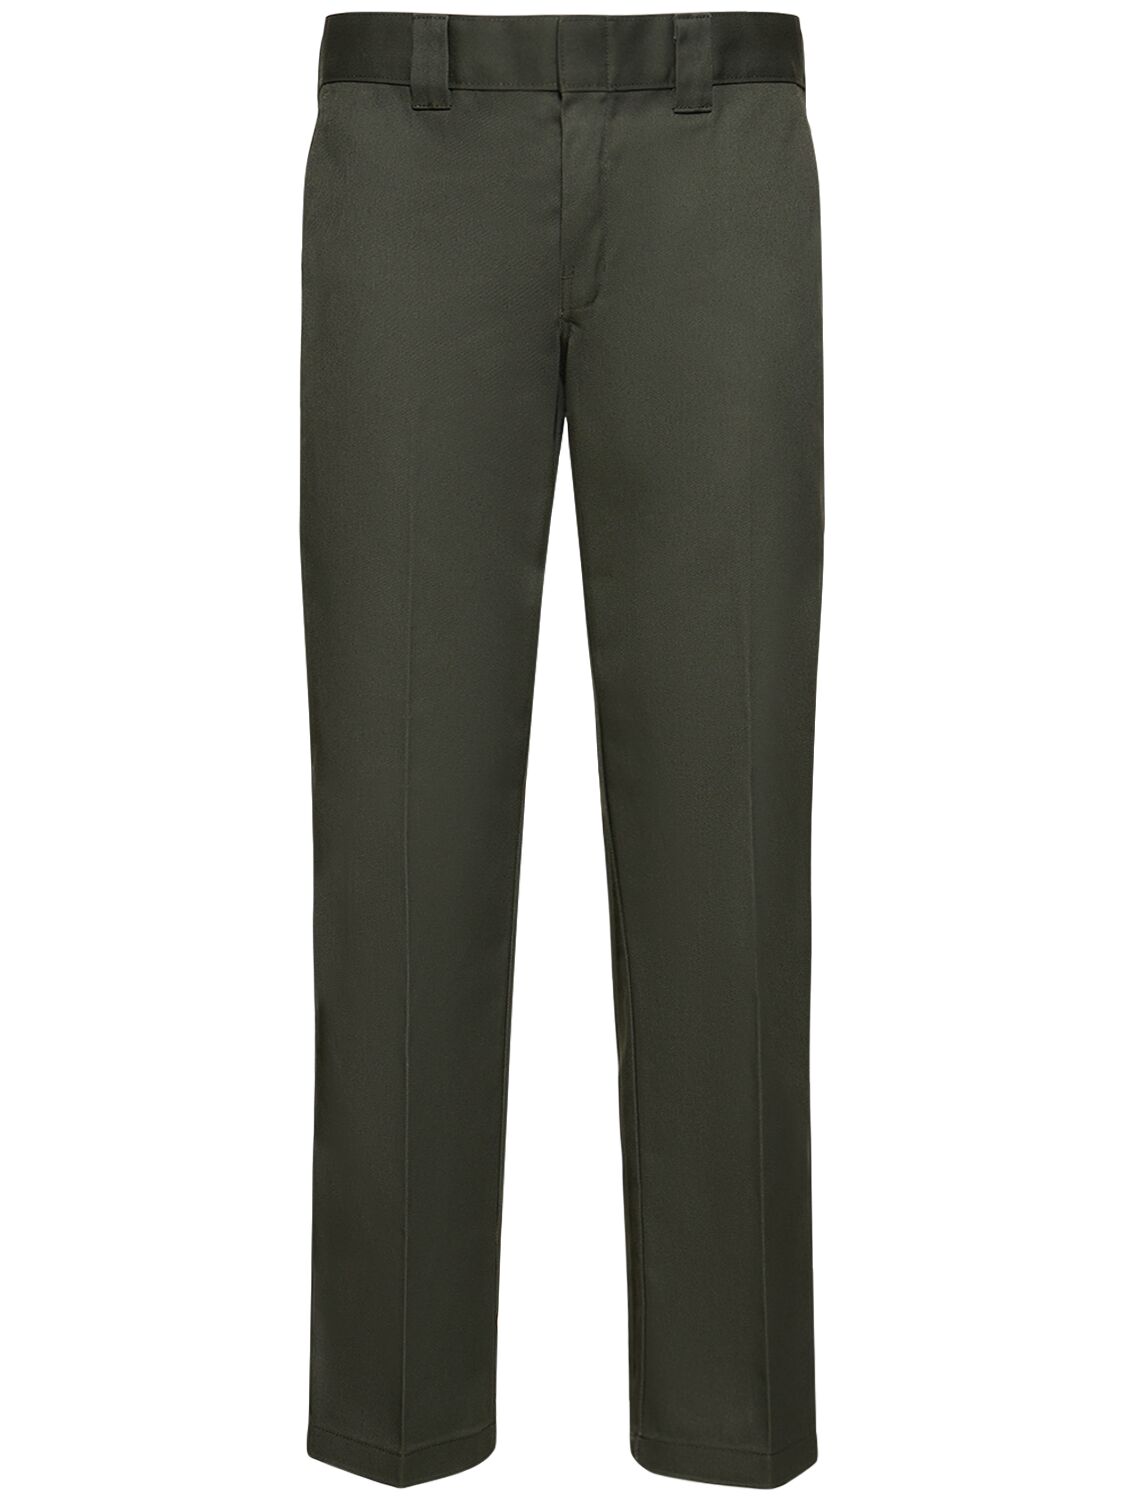 Dickies 873 Work Trousers In Khaki Slim Straight Fit - Mgreen In Green